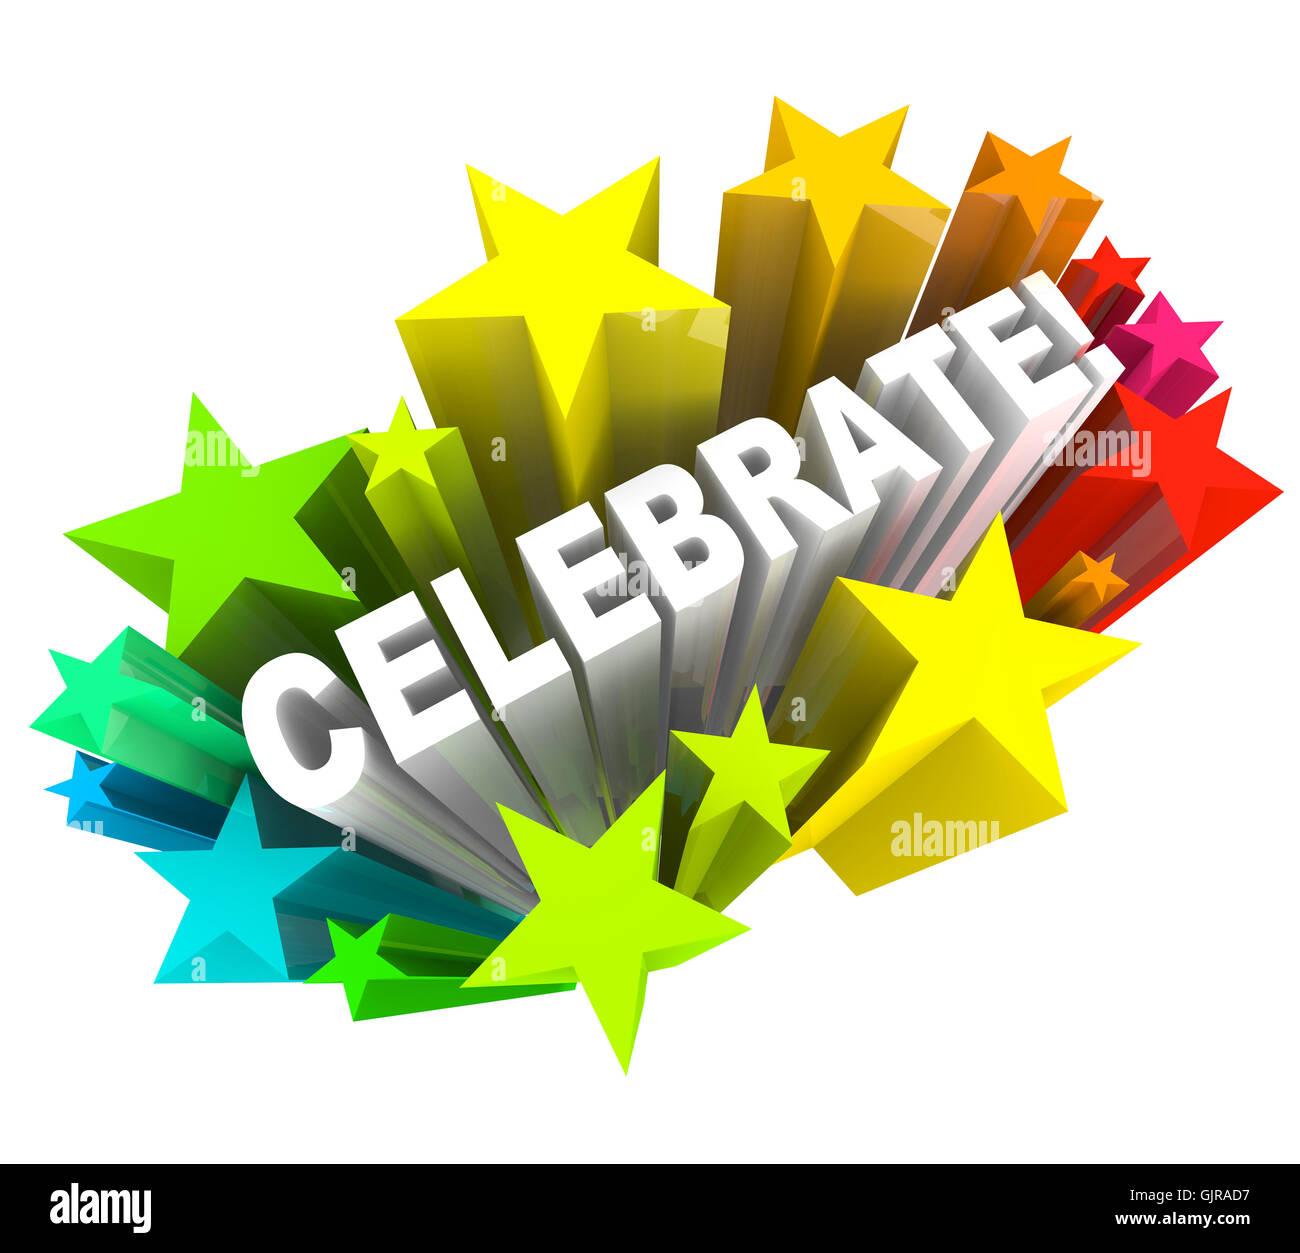 Celebrate - Word in Stars Shooting for Excitement Stock Photo